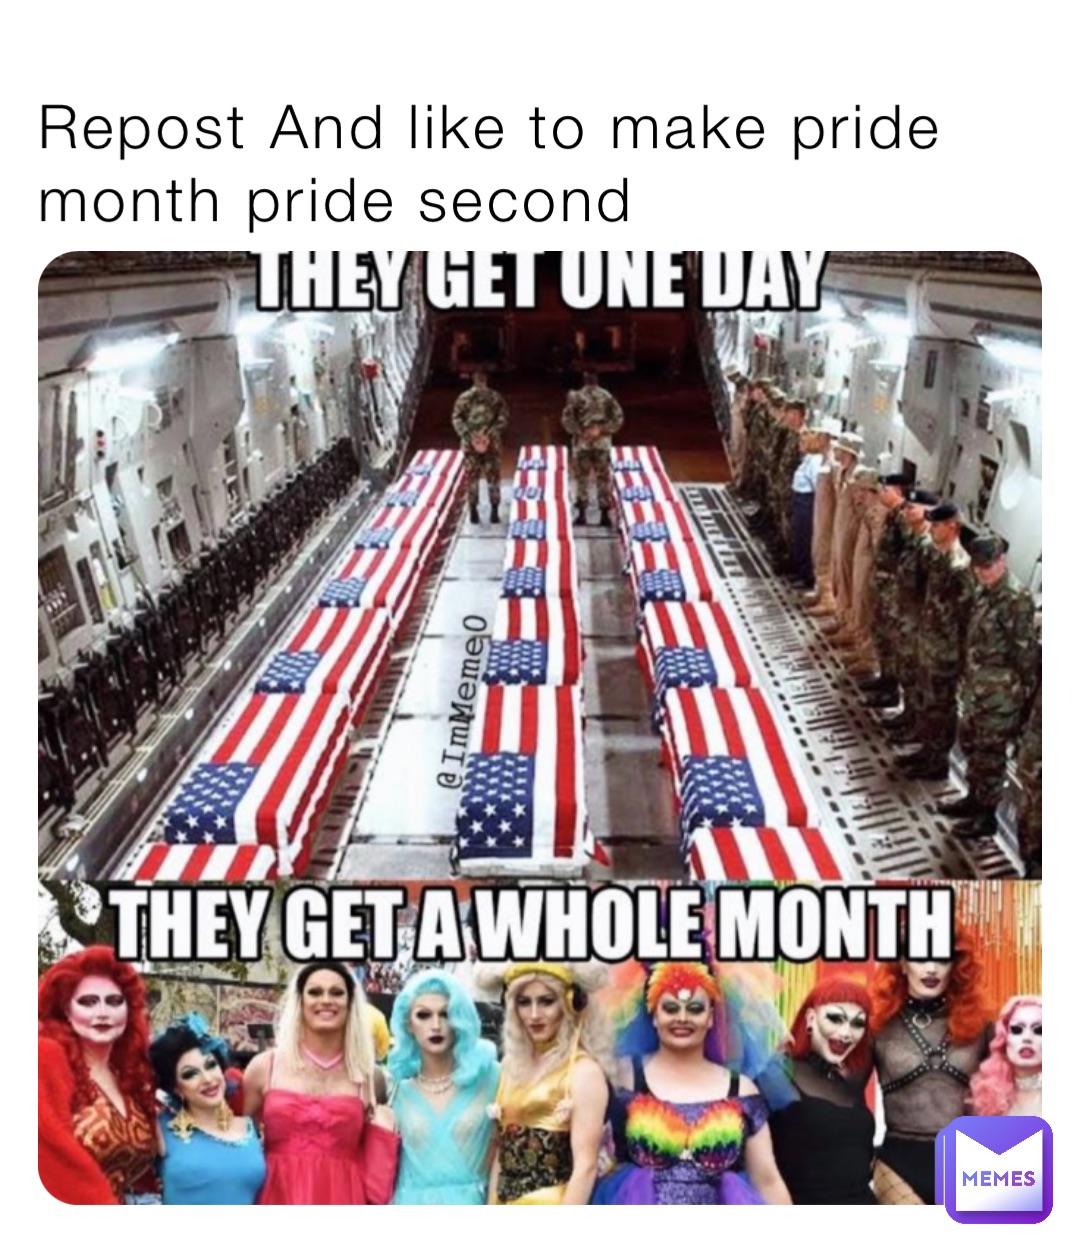 Repost And like to make pride month pride second